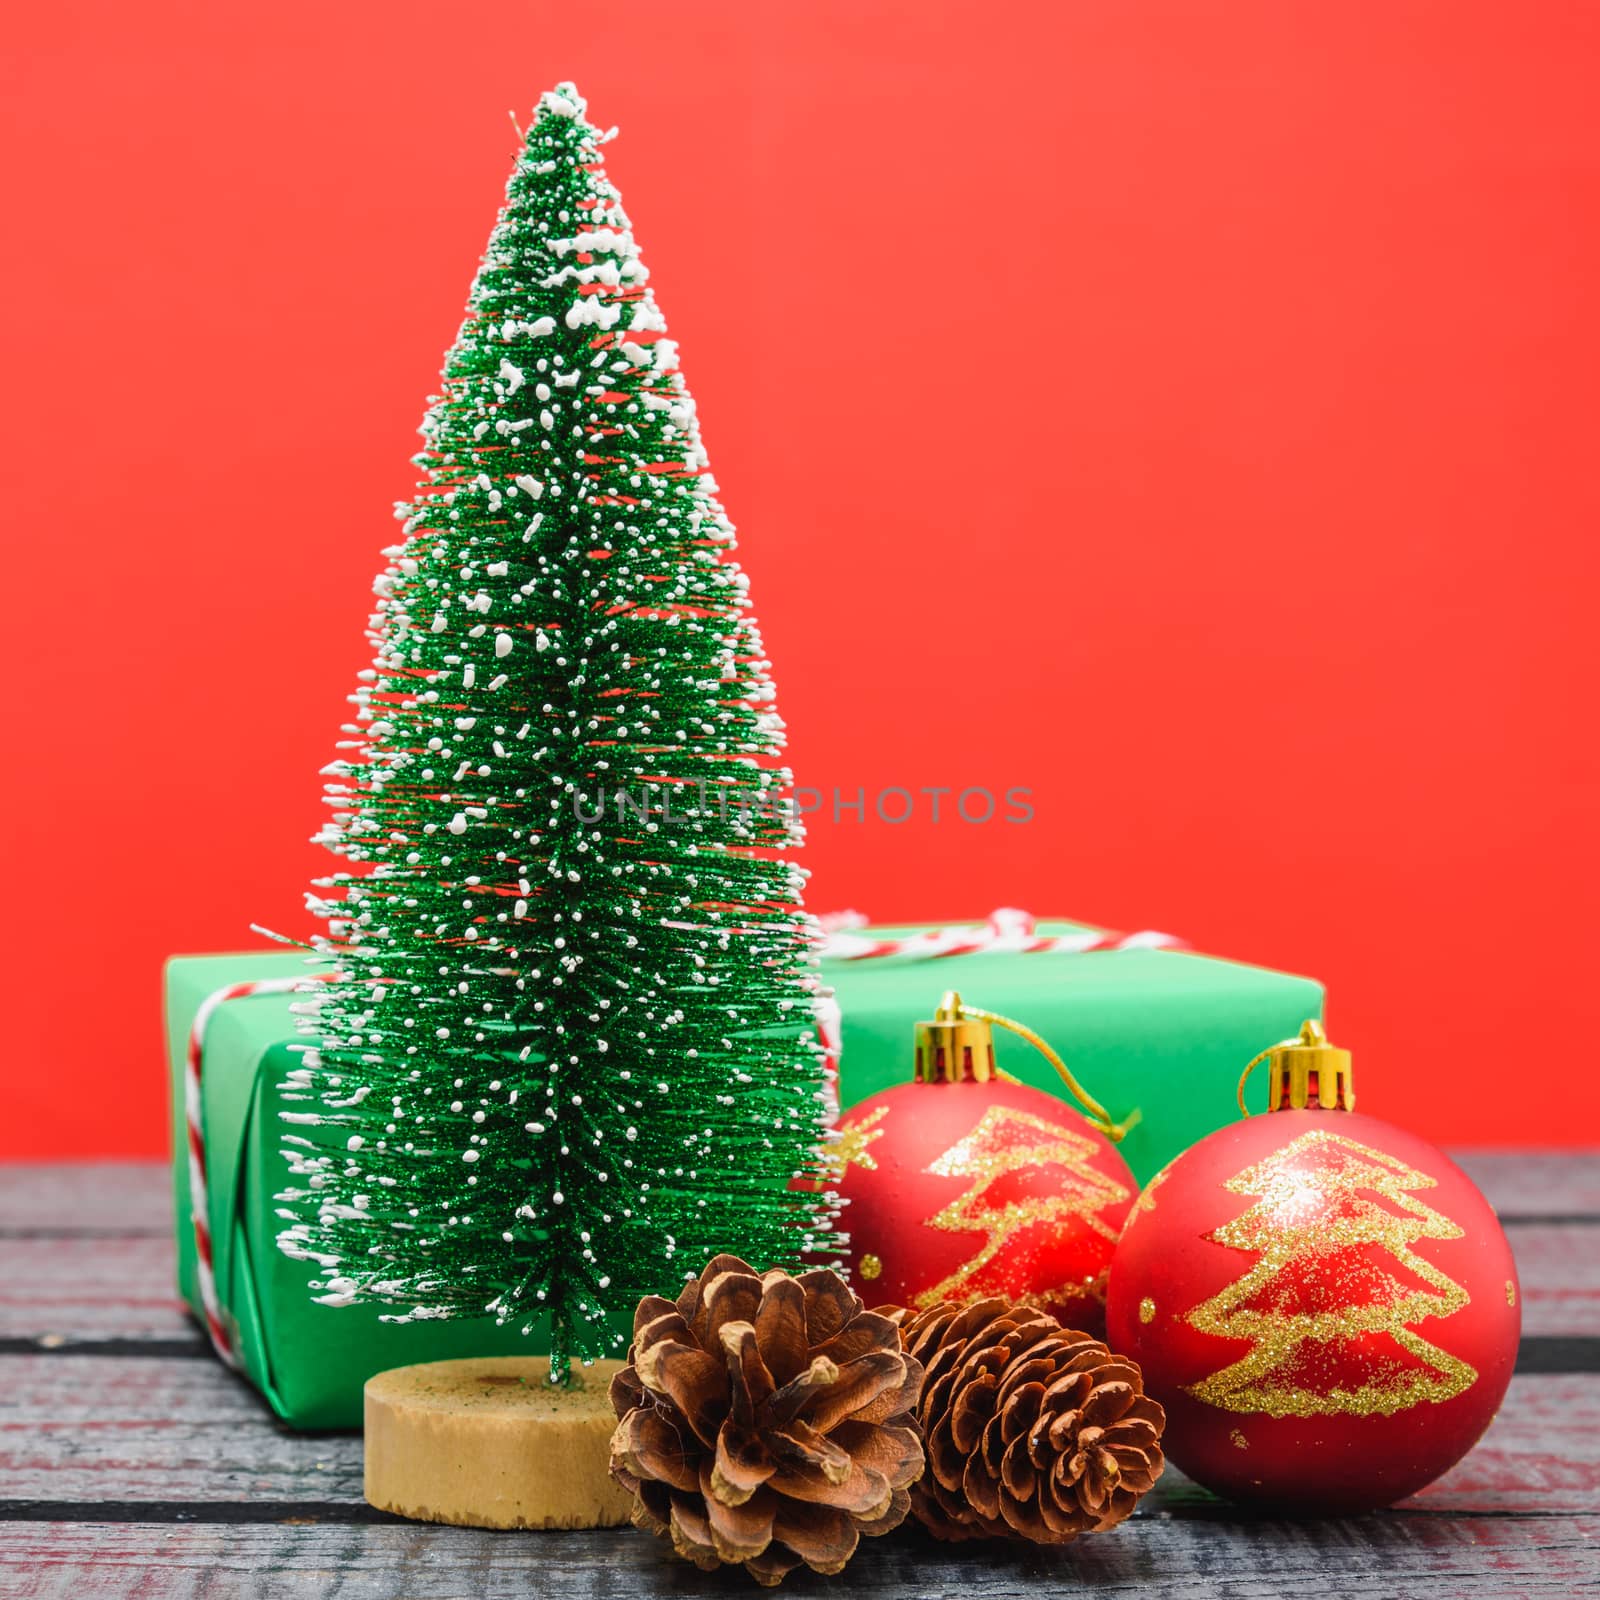 Christmas composition and decorations, minimal green fir tree br by Sorapop